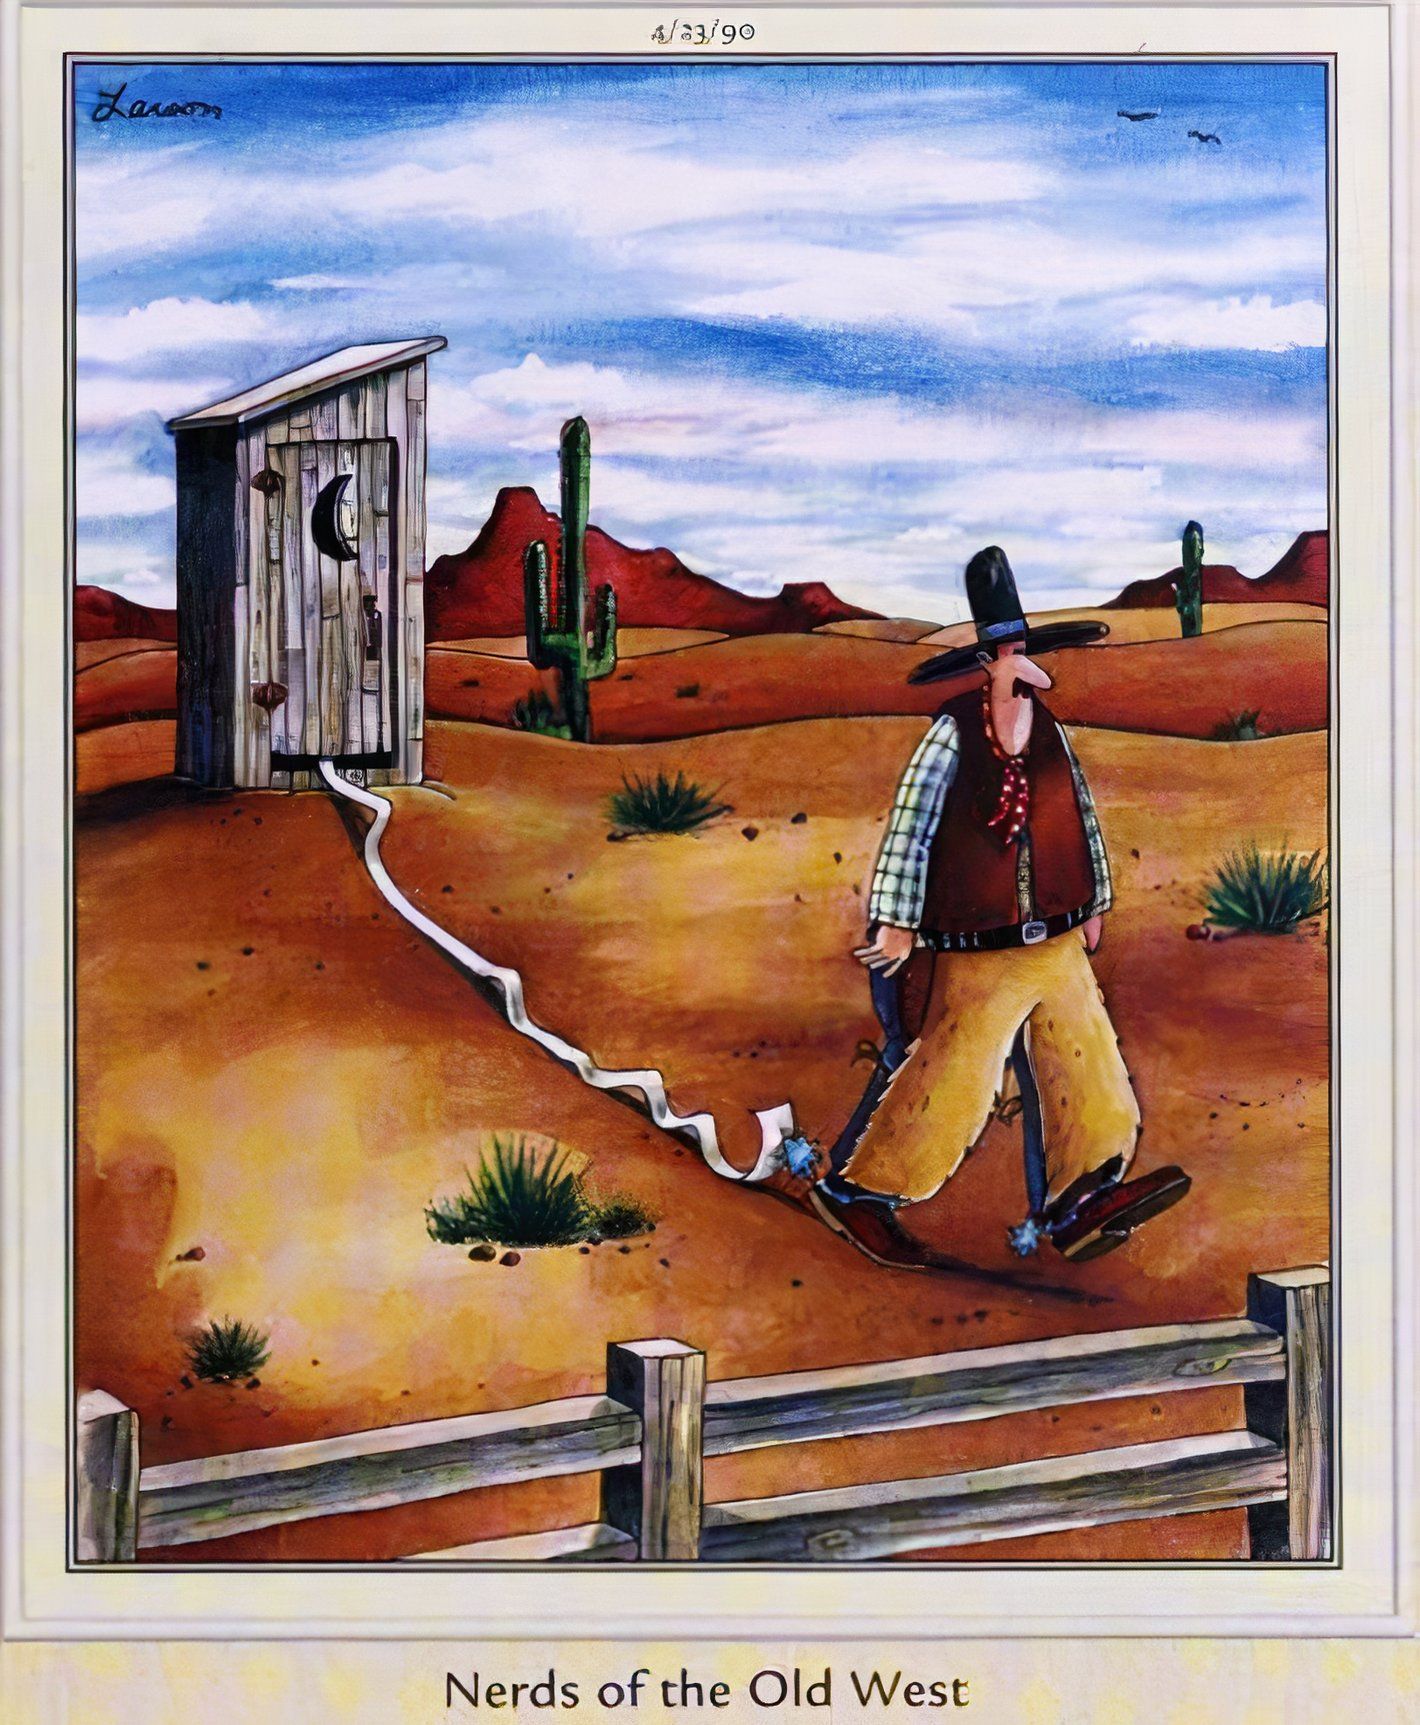 Far Side, 'nerds of the Old West' comic, cowboy trailing toilet paper from outhouse